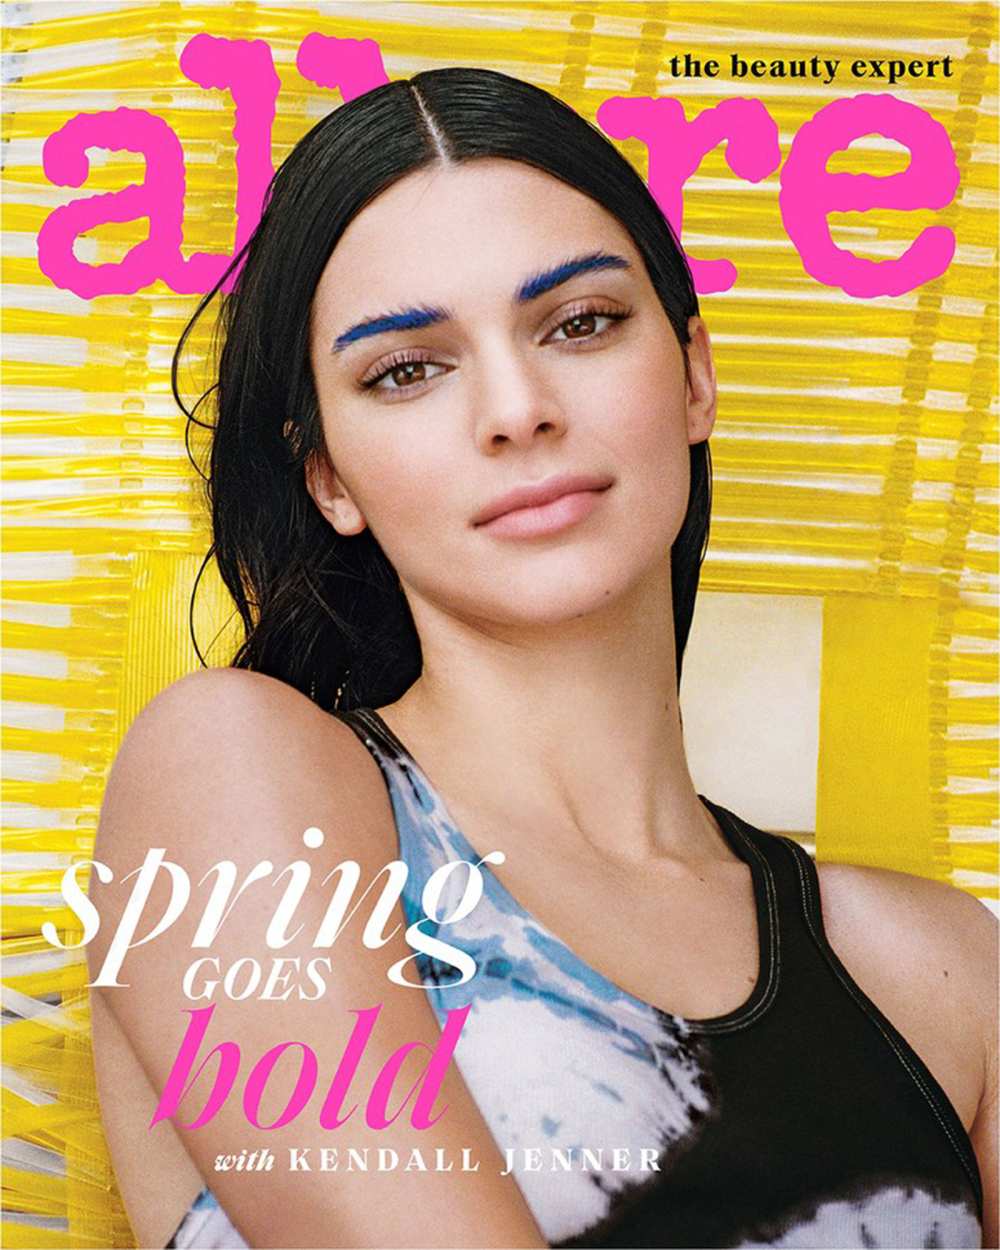 Kendall Jenner on the cover of Allure